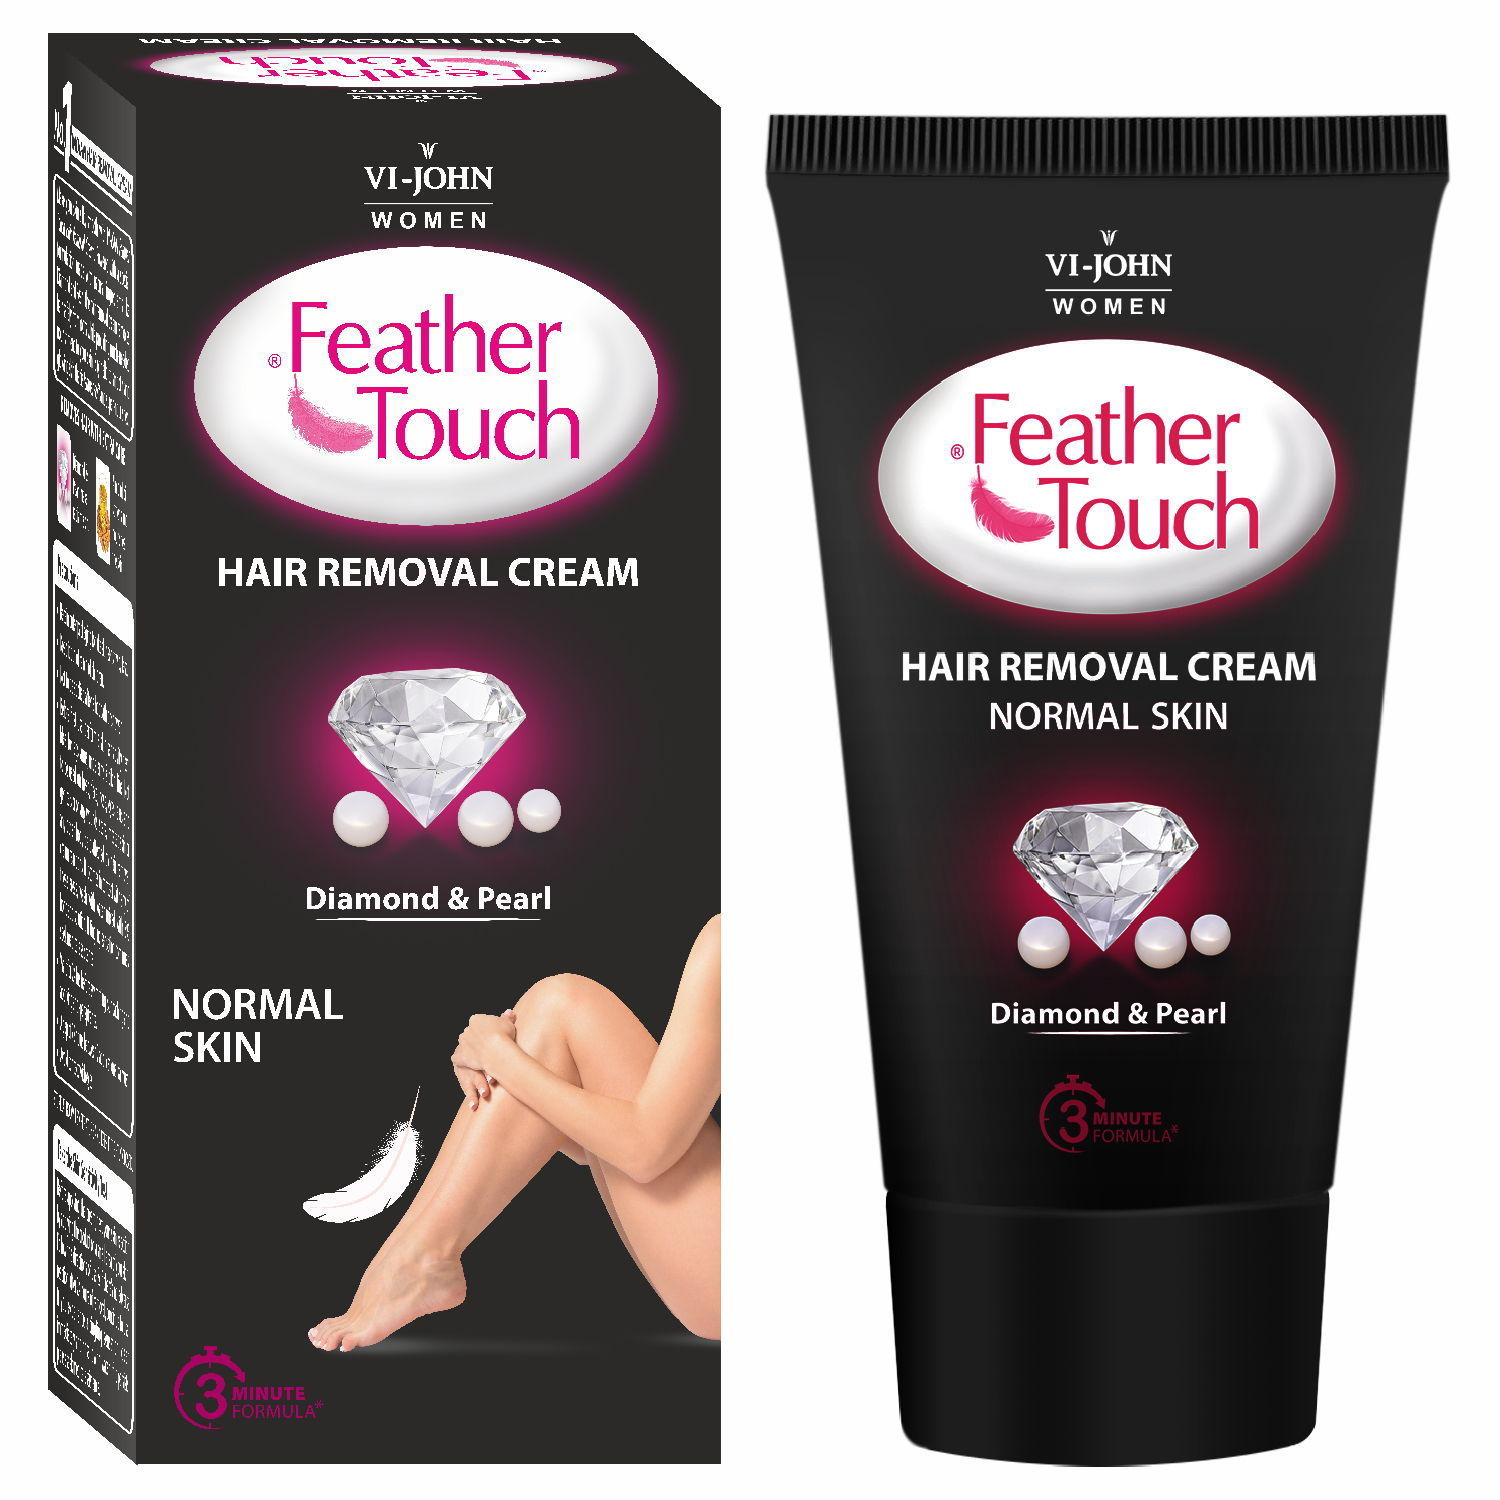 Vi-John Feather Touch Diamond & Pearl Hair Removal for Salon-like Finish No Ammonia Smell Cream  (40 g)